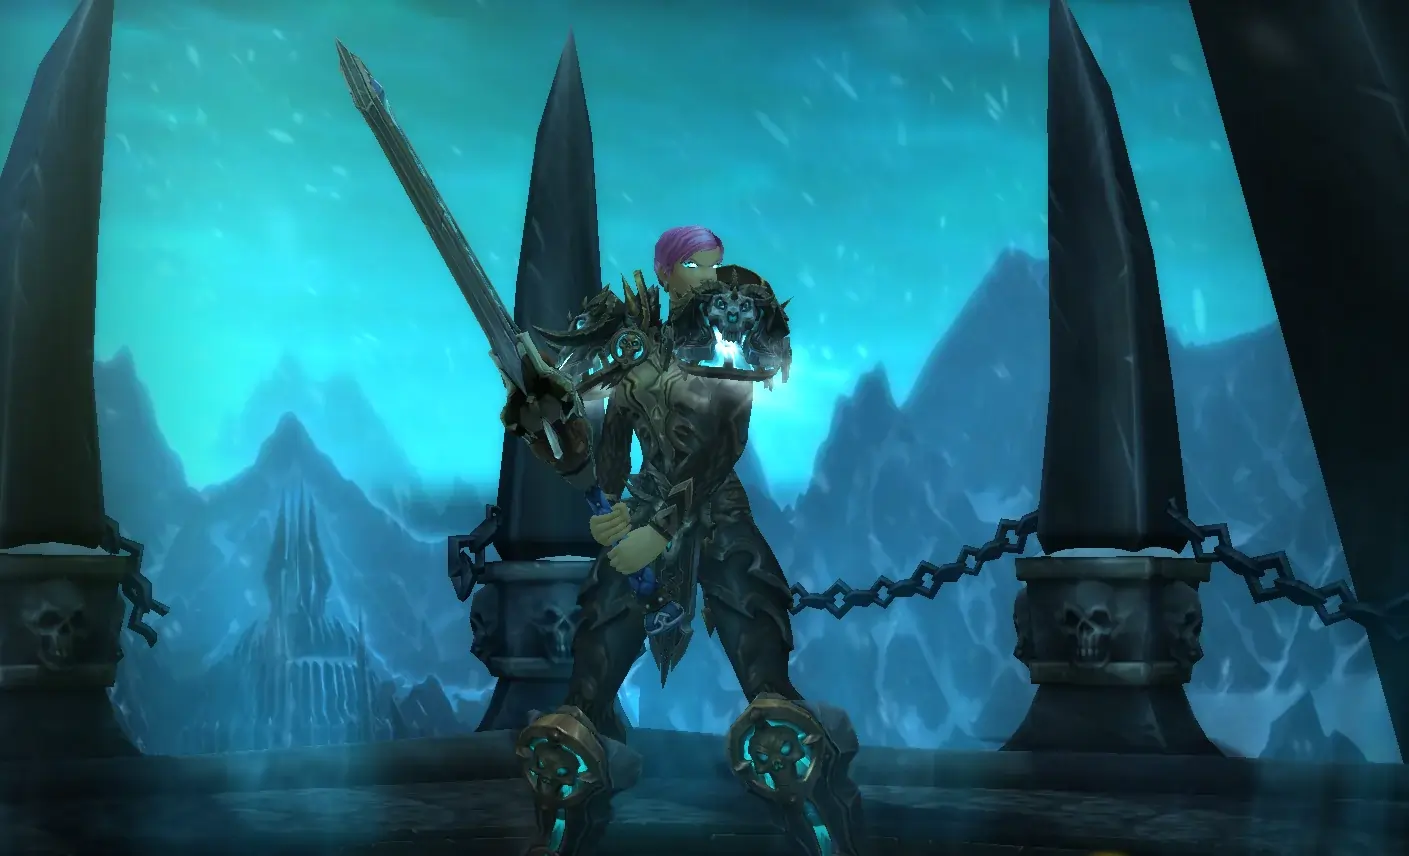 Image of a Death Knight character from world of warcraft login page